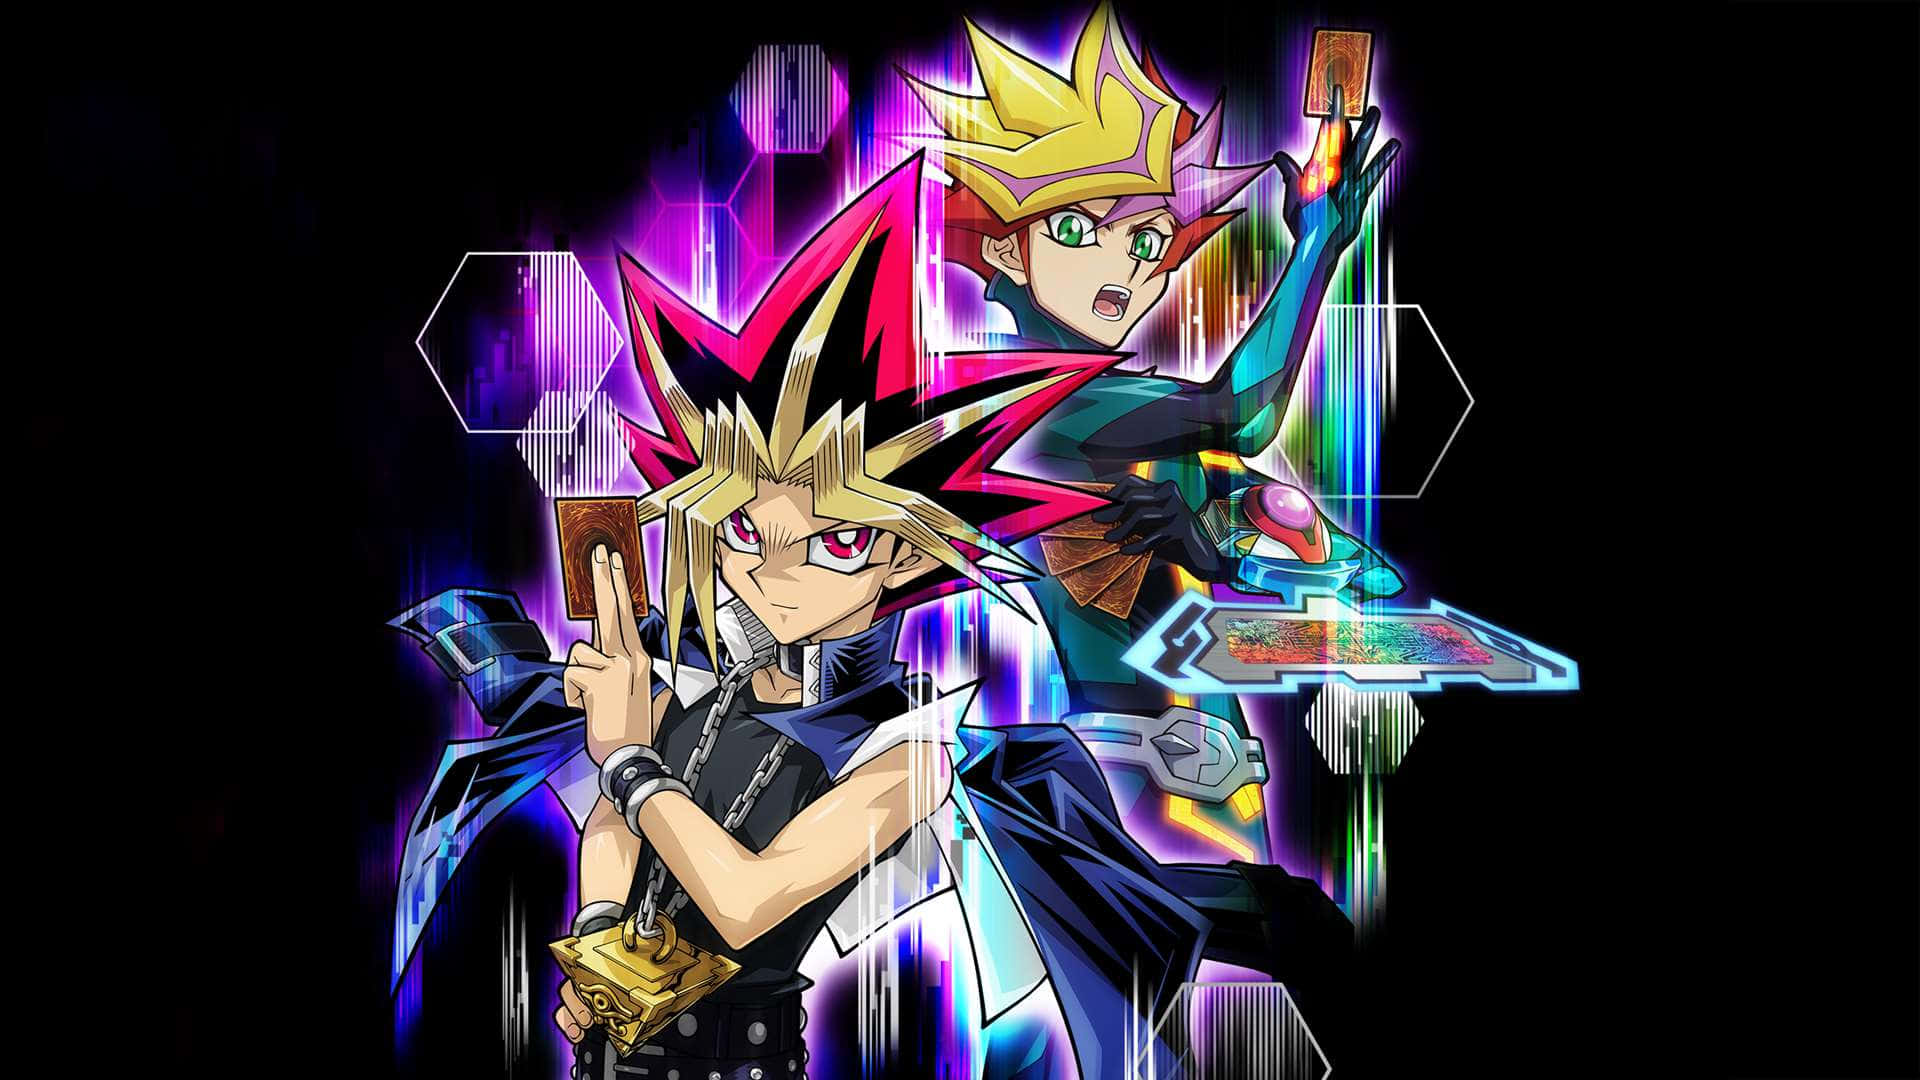 Yami Yugi displaying his Duelist prowess in a captivating 1920x1080 wallpaper. Wallpaper